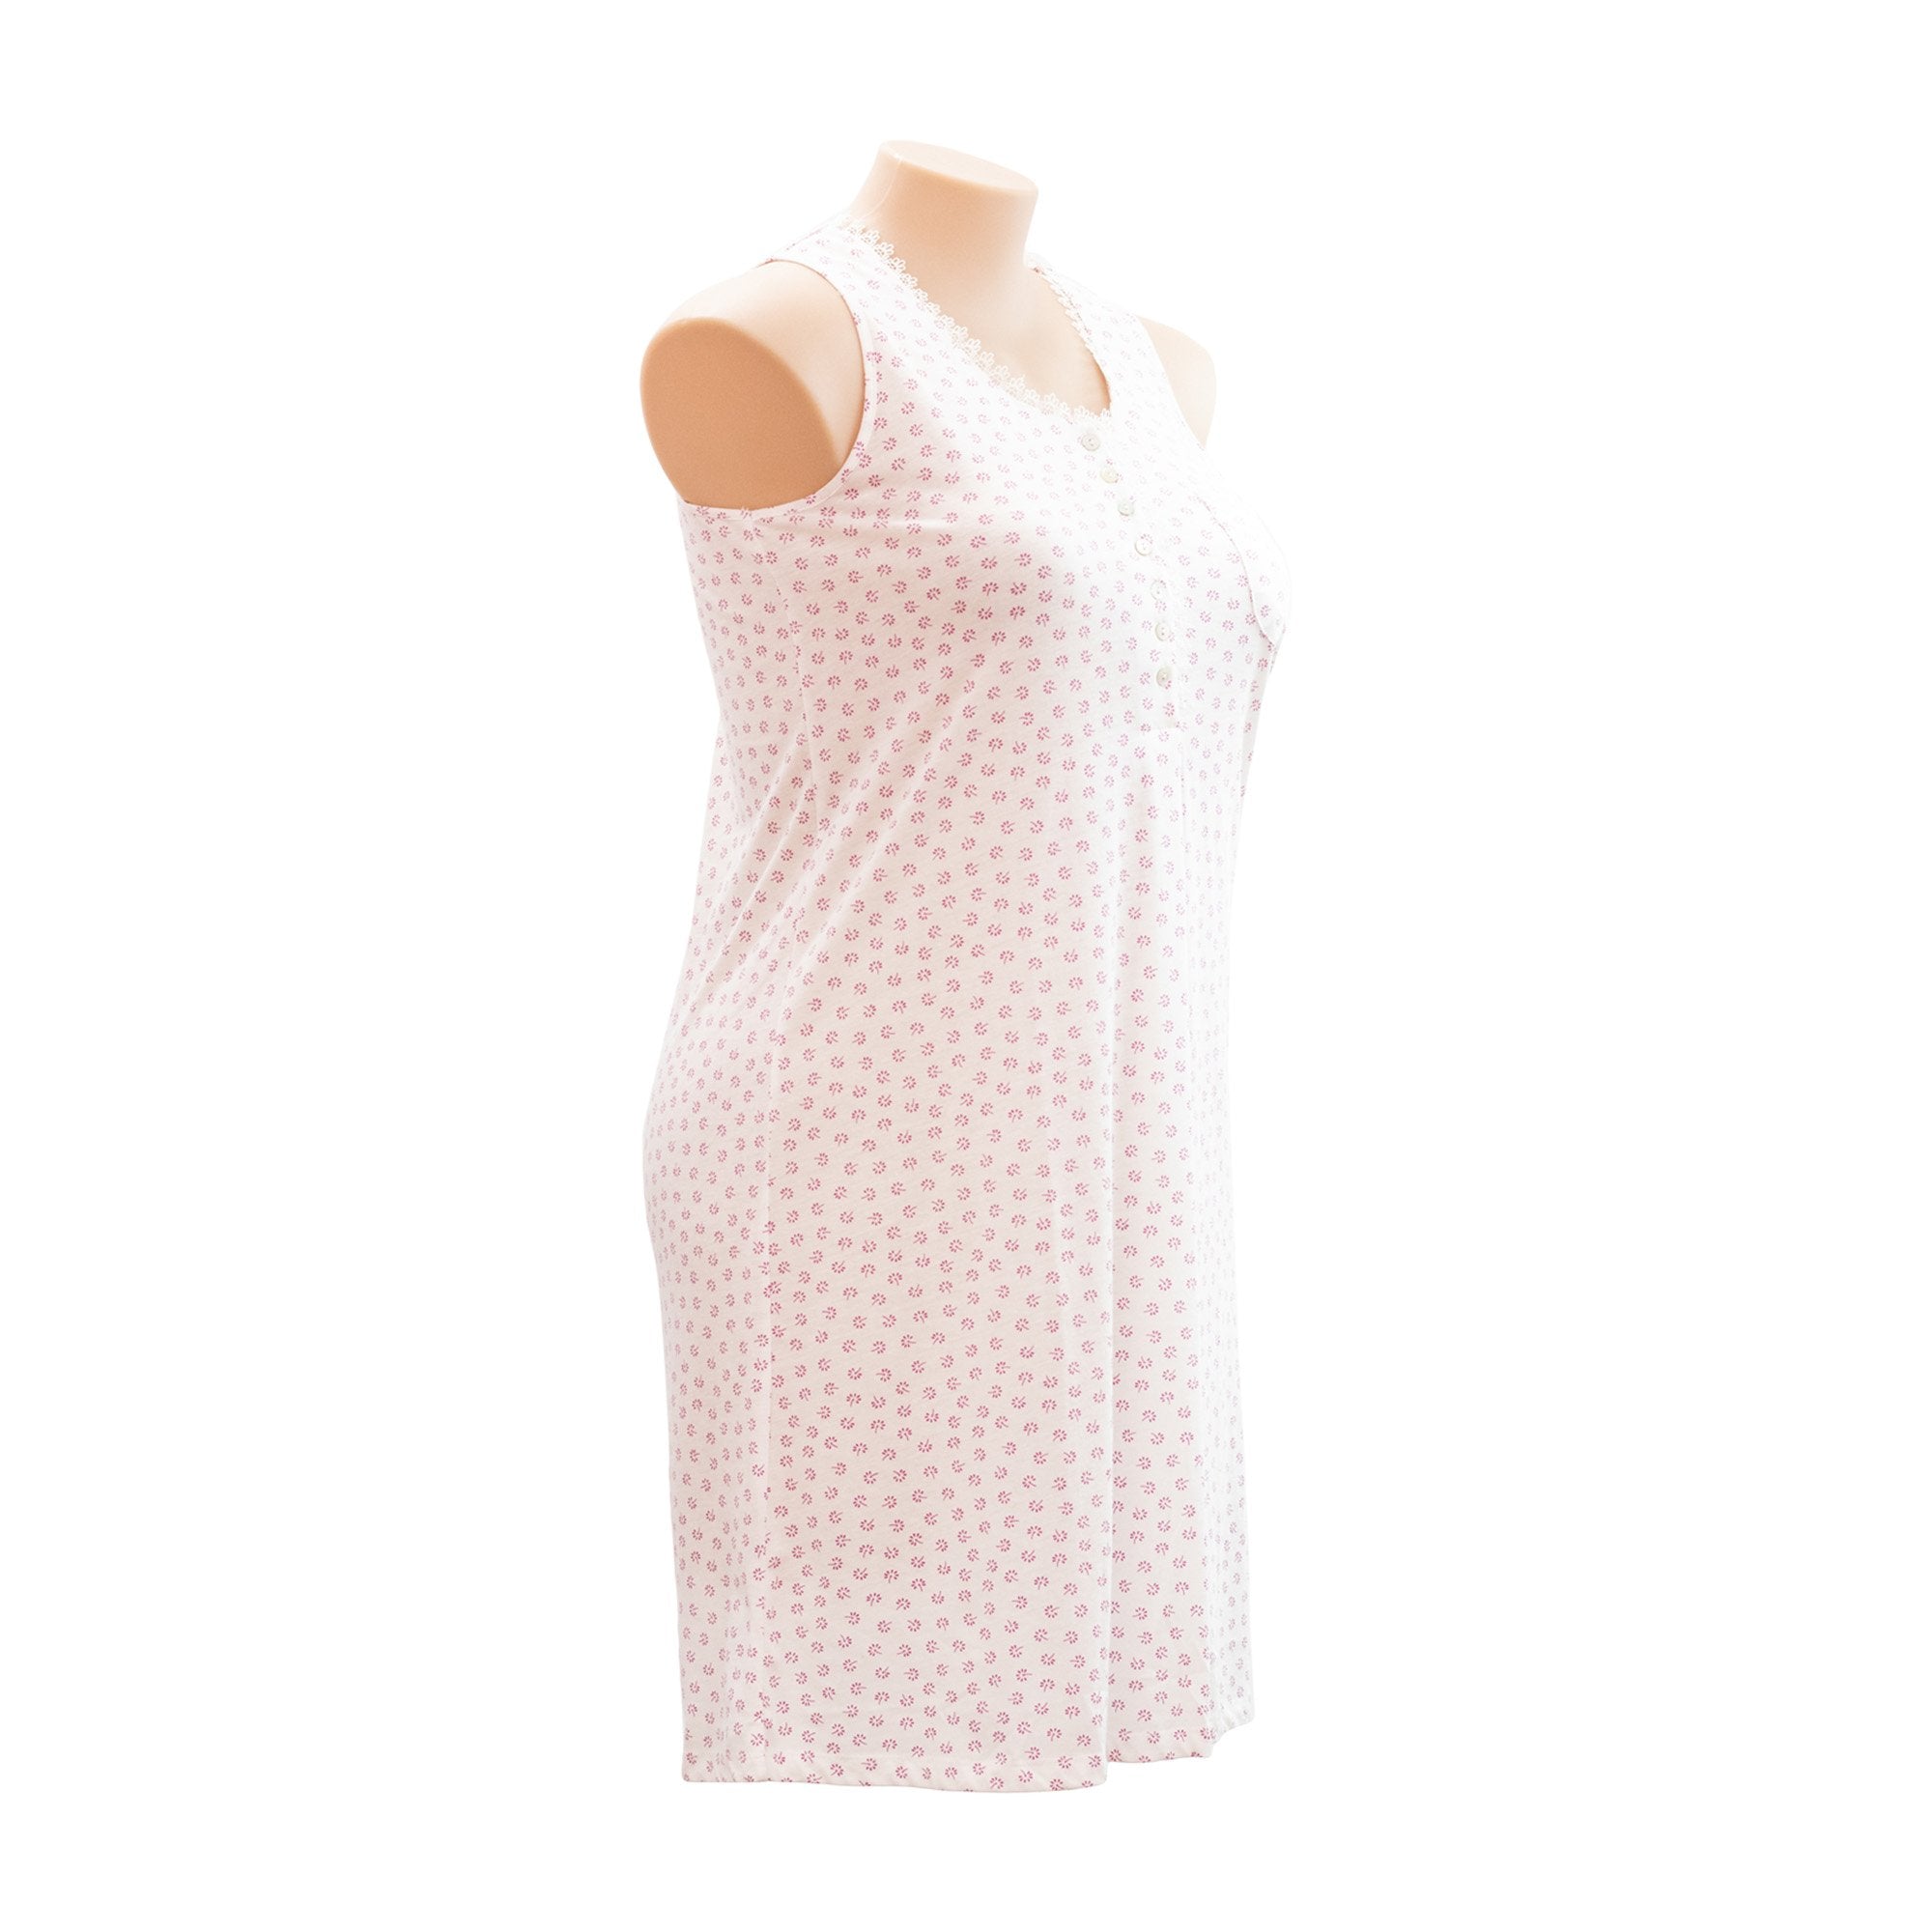 Givoni Daffodil Sleeveless - Nighties  Available at Illusions Lingerie